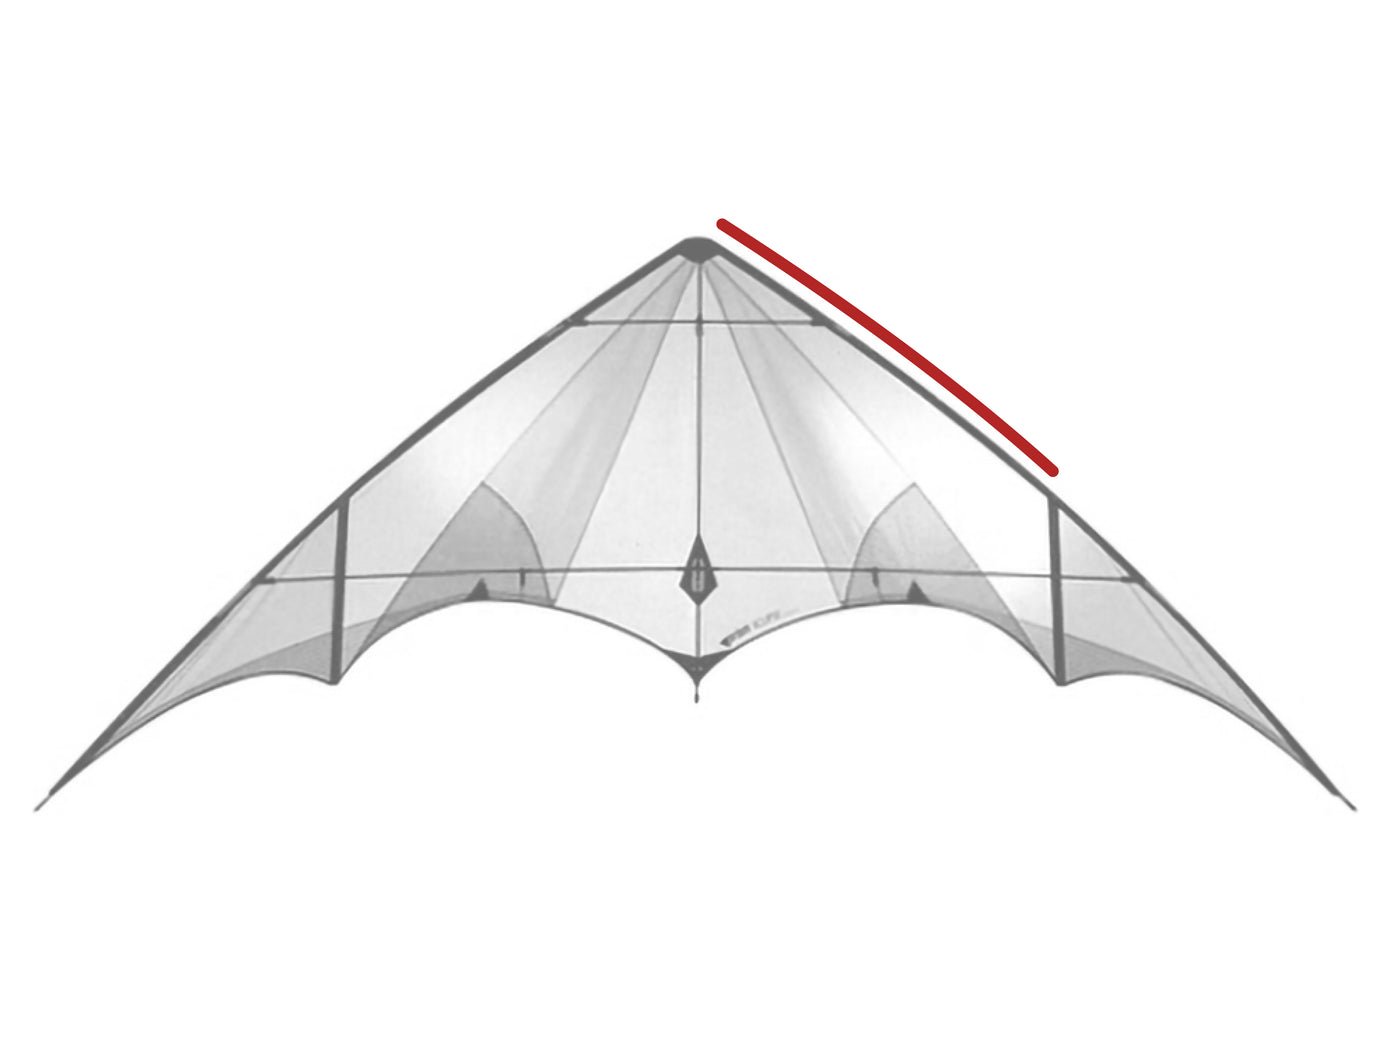 Diagram showing location of the Eclipse SUL Upper Leading Edge on the kite.